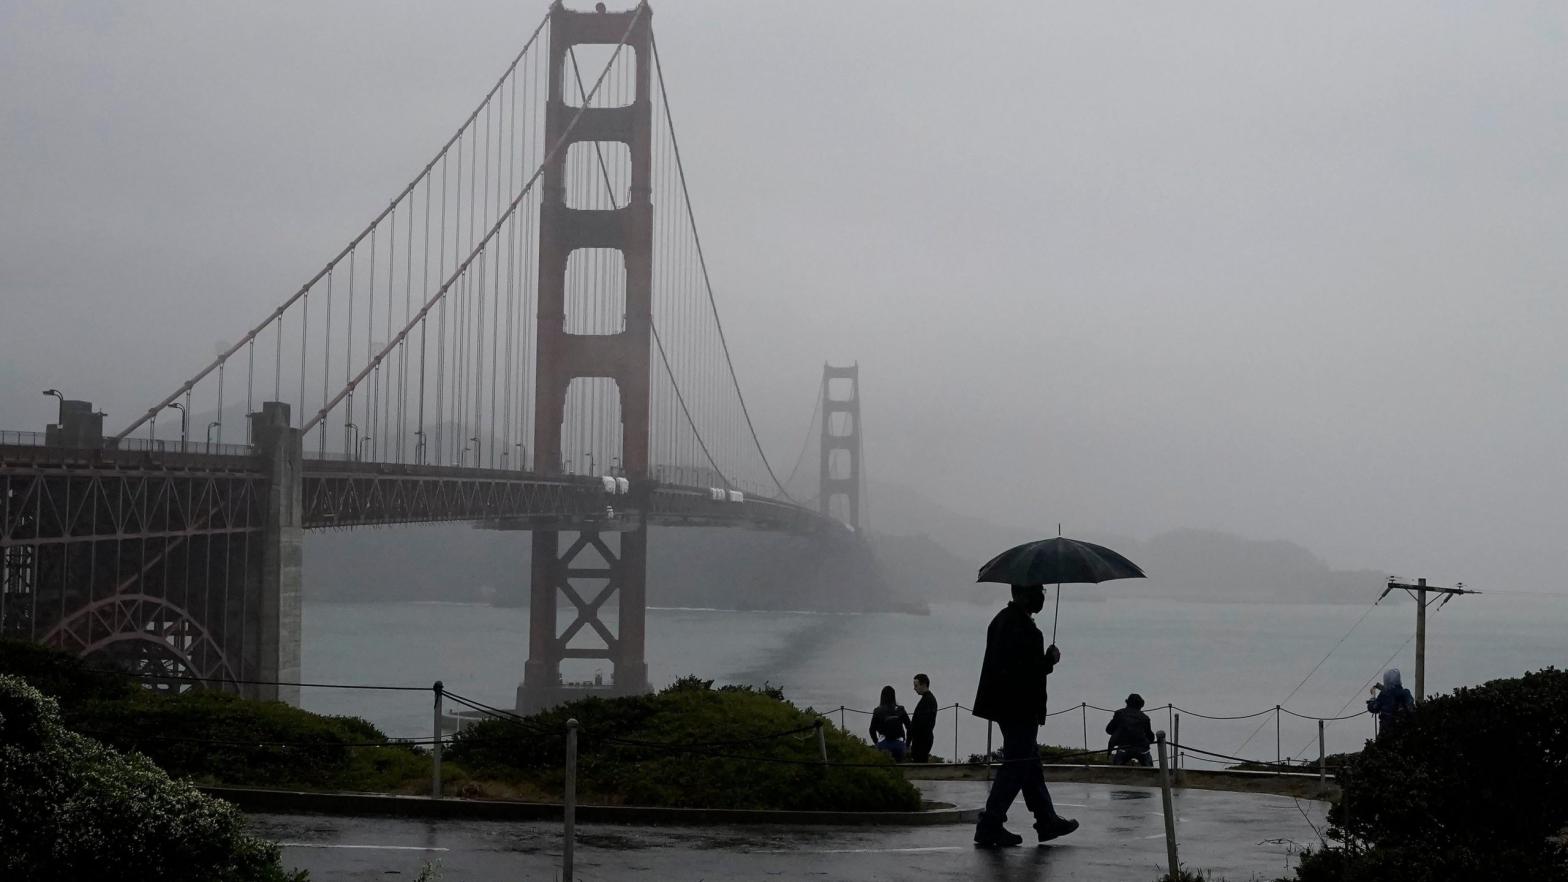 A pedestrian carries an umbrella while walking on a path in front of the Golden Gate Bridge in San Francisco on Wednesday, Oct. 20, 2021. (Photo: Jeff Chiu, AP)